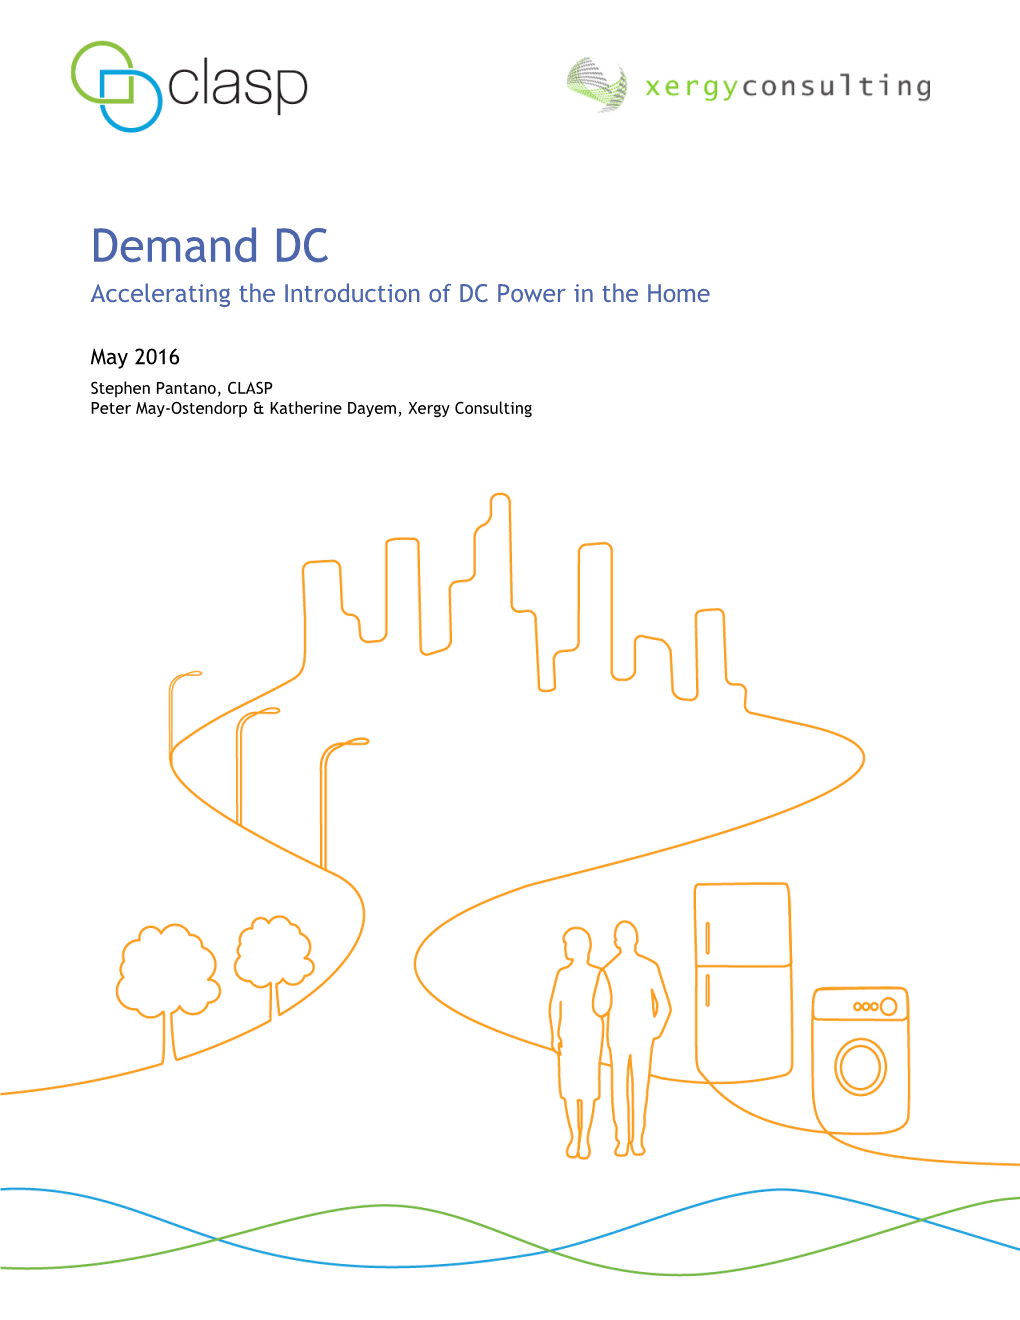 Demand DC – Accelerating the Introduction of DC Power